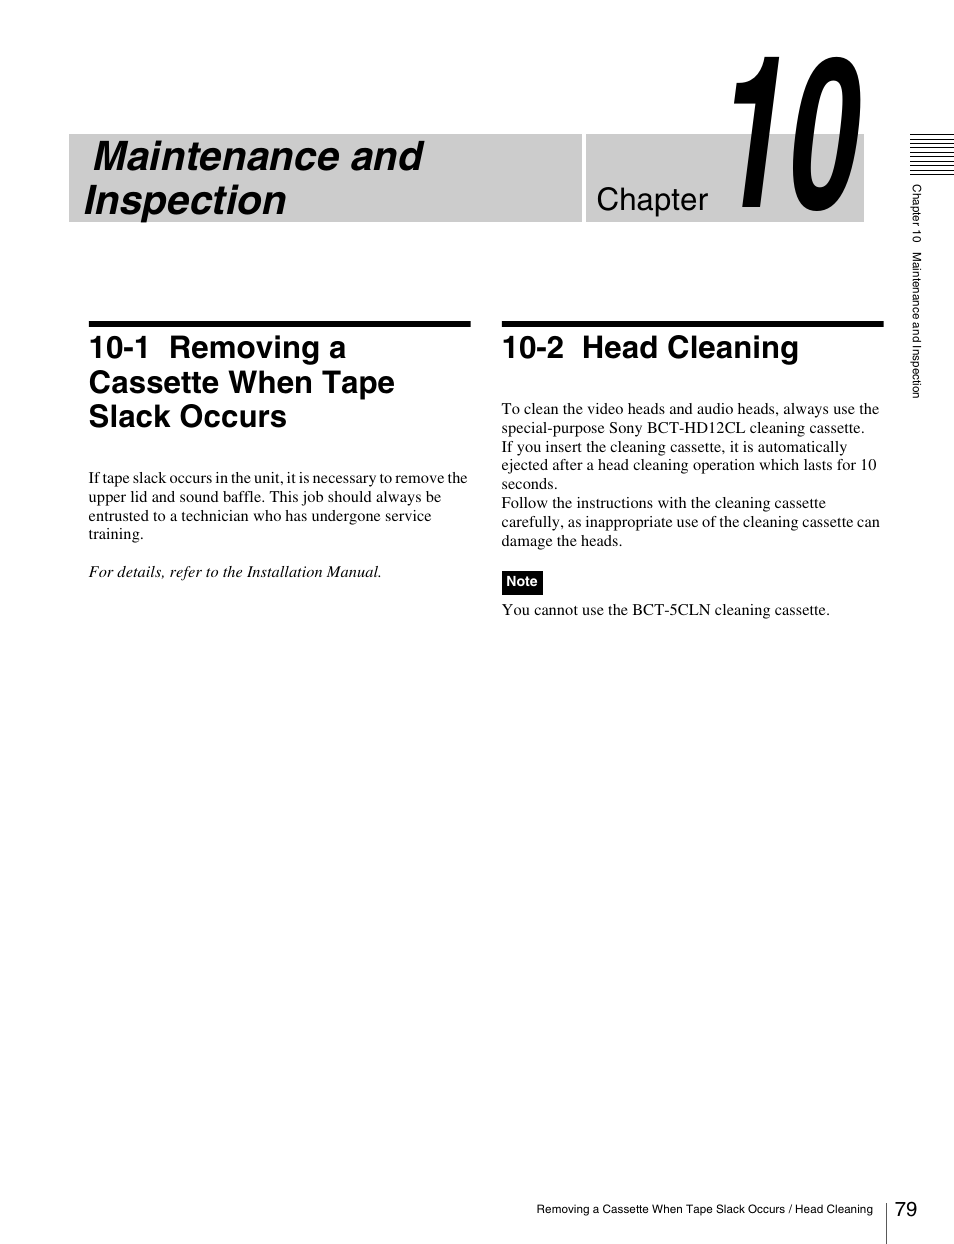 Chapter 10 maintenance and inspection, 1 removing a cassette when tape slack occurs, 2 head cleaning | Removing a cassette when tape slack occurs . 79, Head cleaning, Maintenance and inspection, Chapter | Sony HDW-S280 User Manual | Page 79 / 94